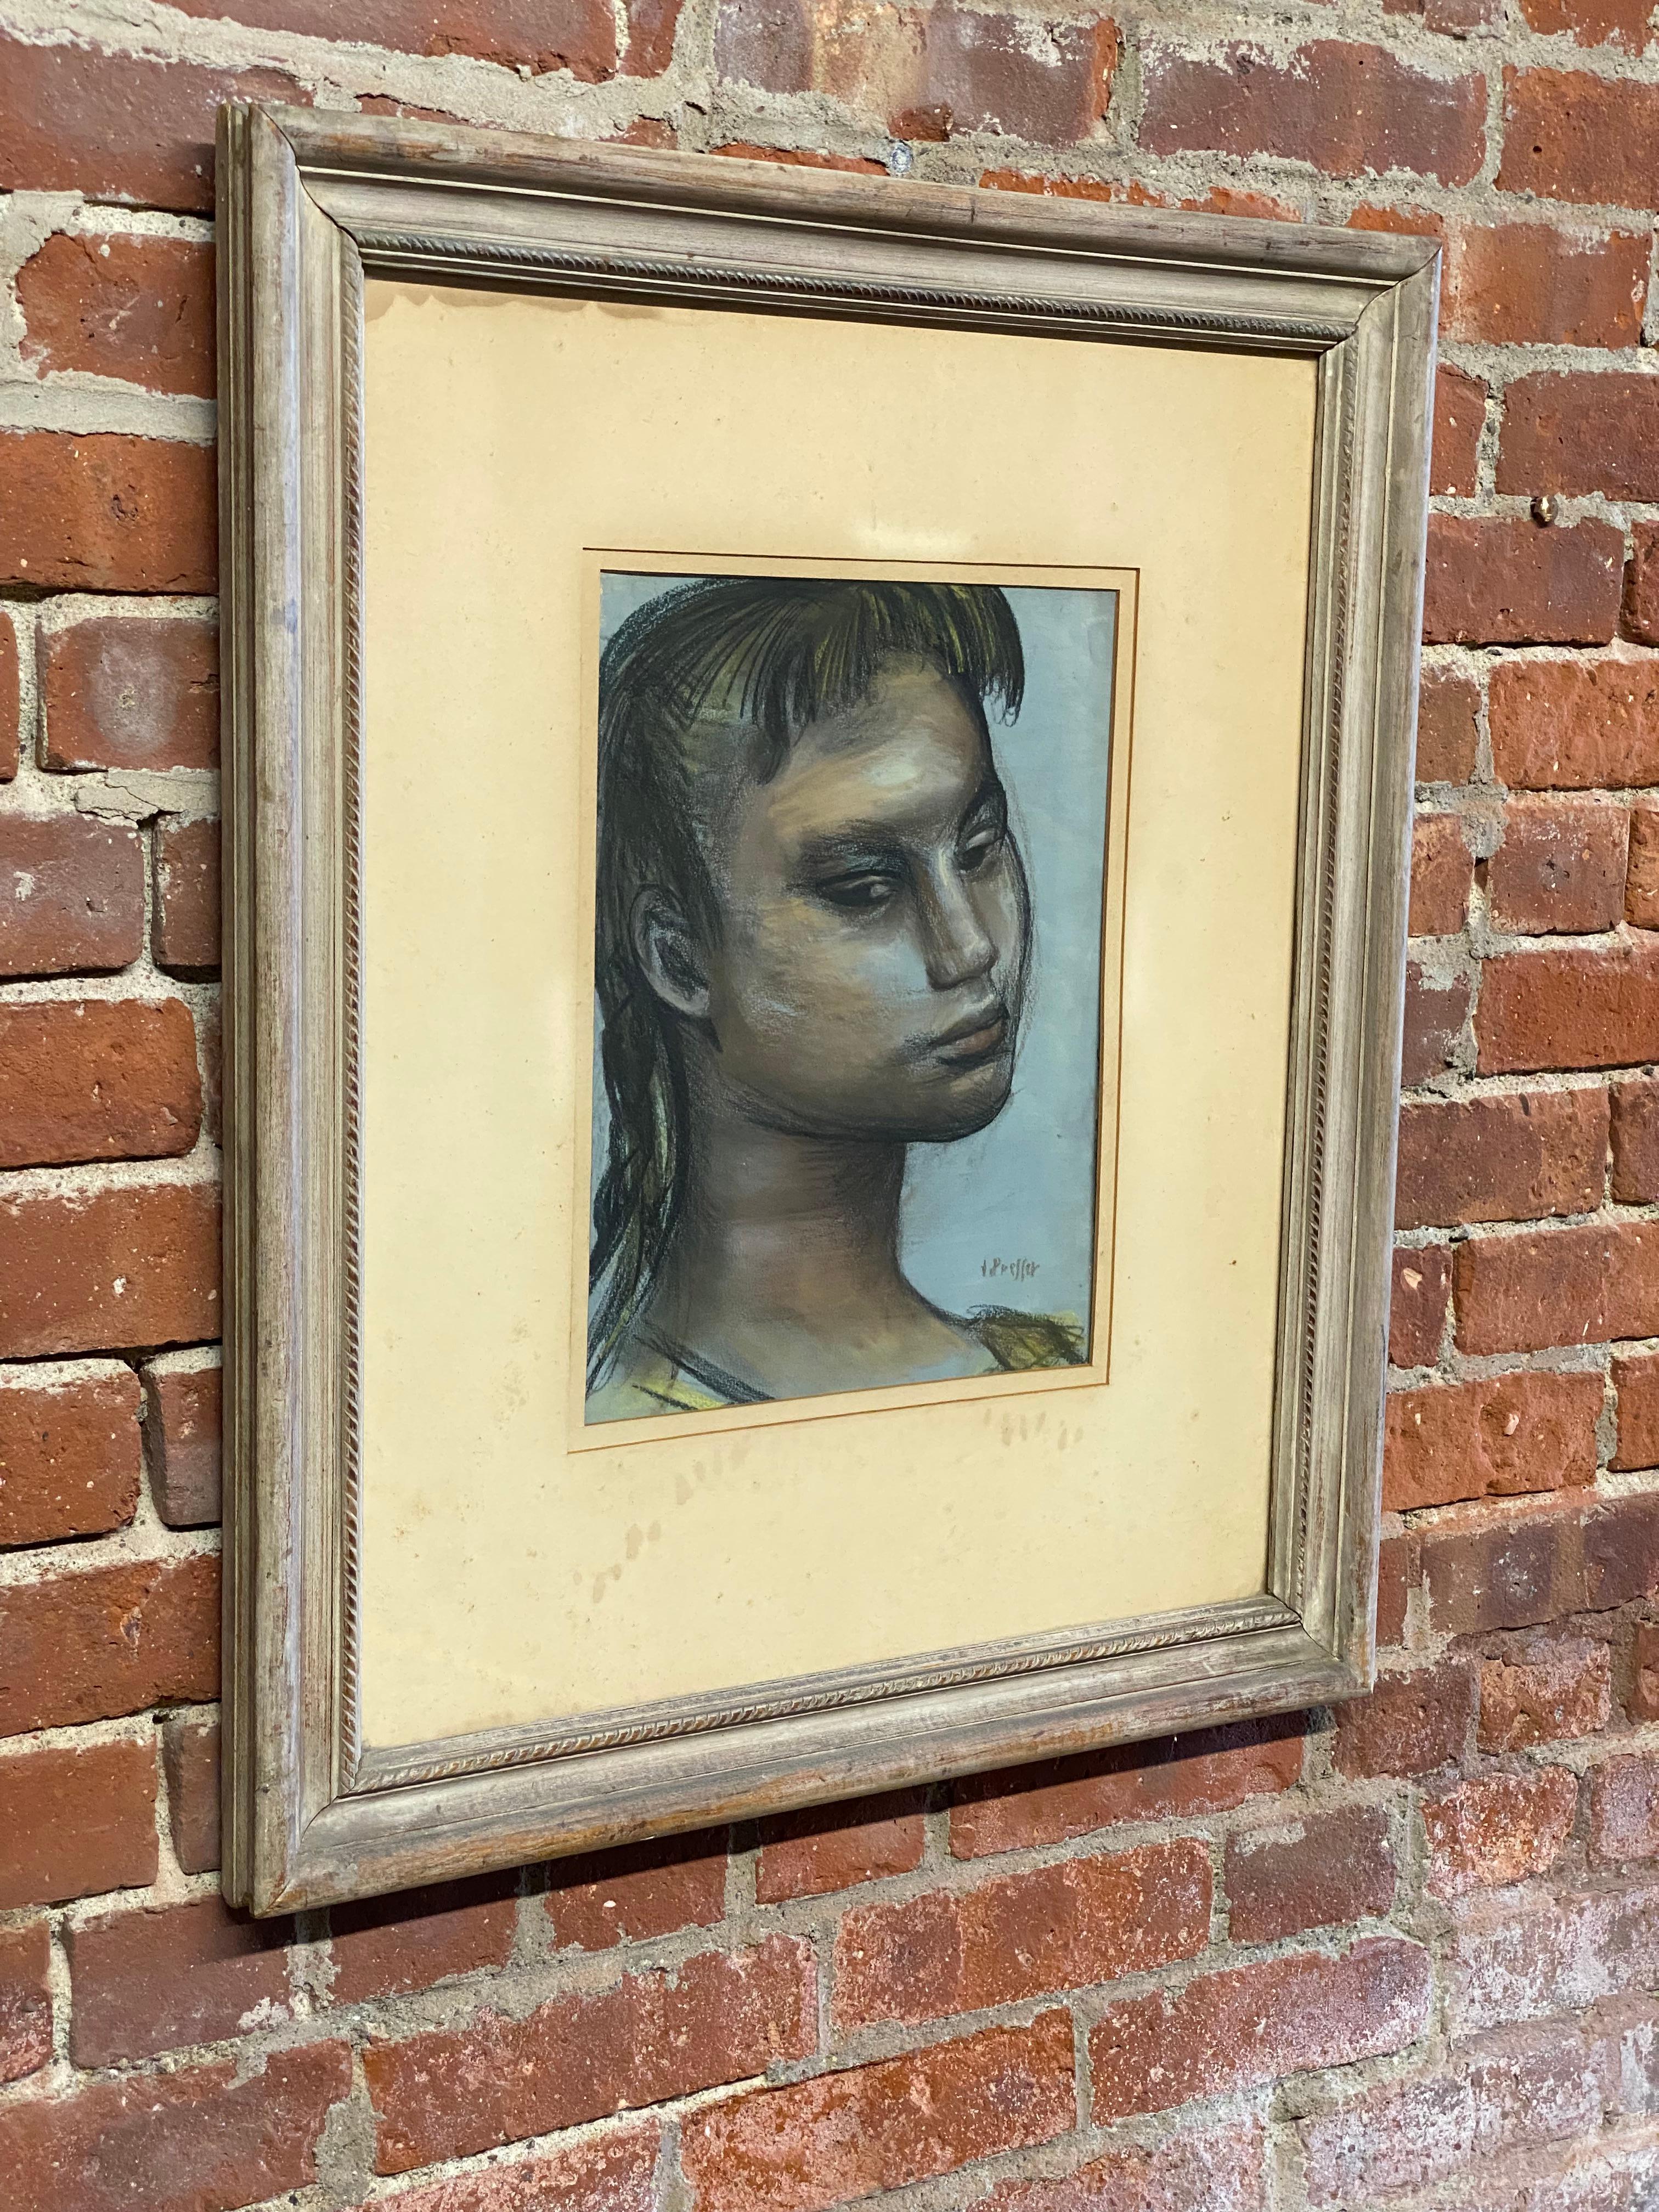 Josef Presser (1907-1967) pastel and charcoal Portrait of a Woman on paper. Circa 1950. Presser uses an expressive hand and renders a 3/4 a striking 3/4 close up portrait. The approximate site dimensions are 9.5